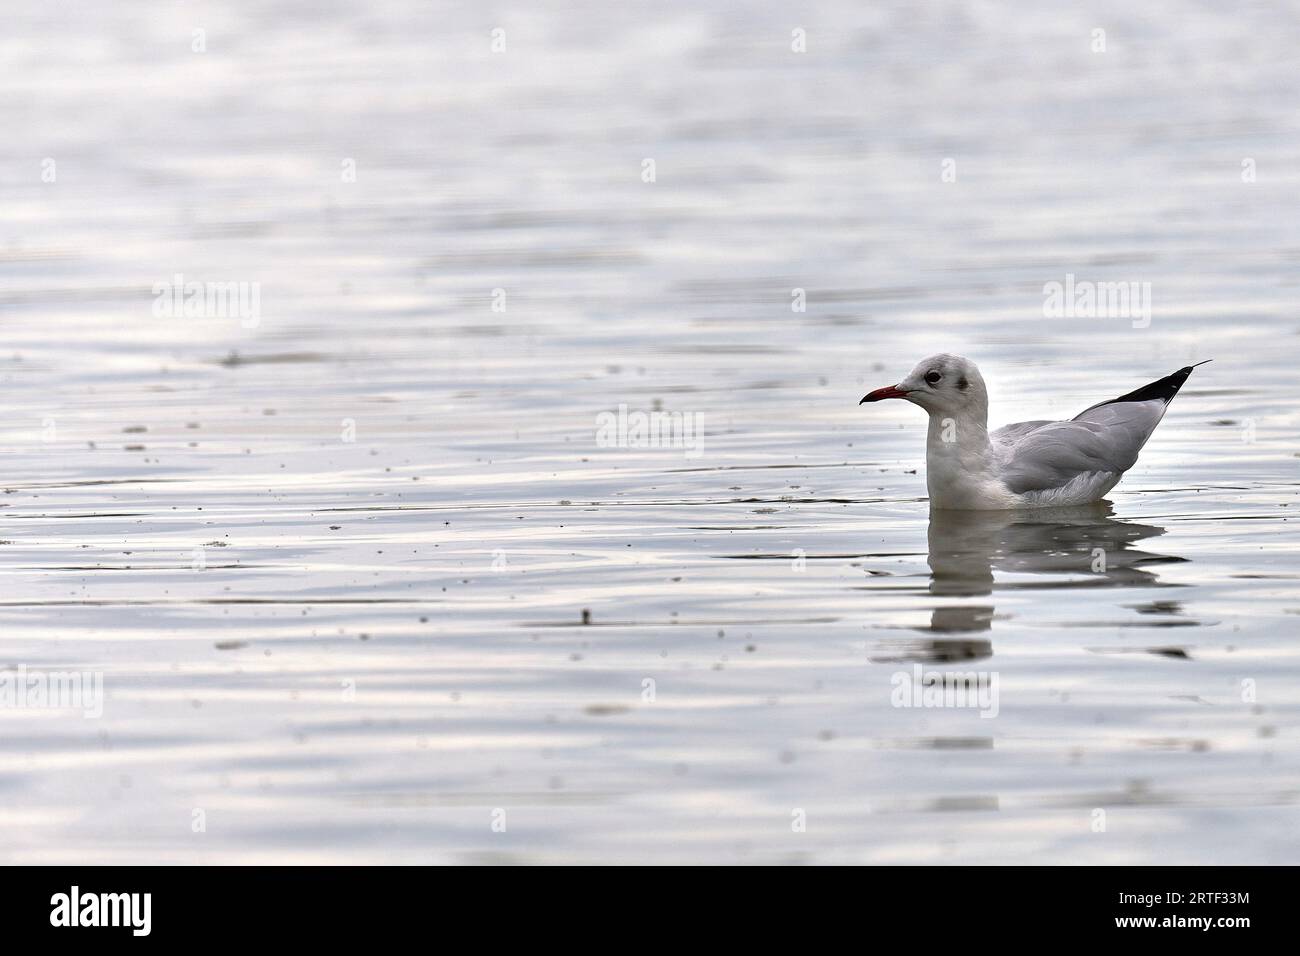 Black-headed gull on the water Stock Photo